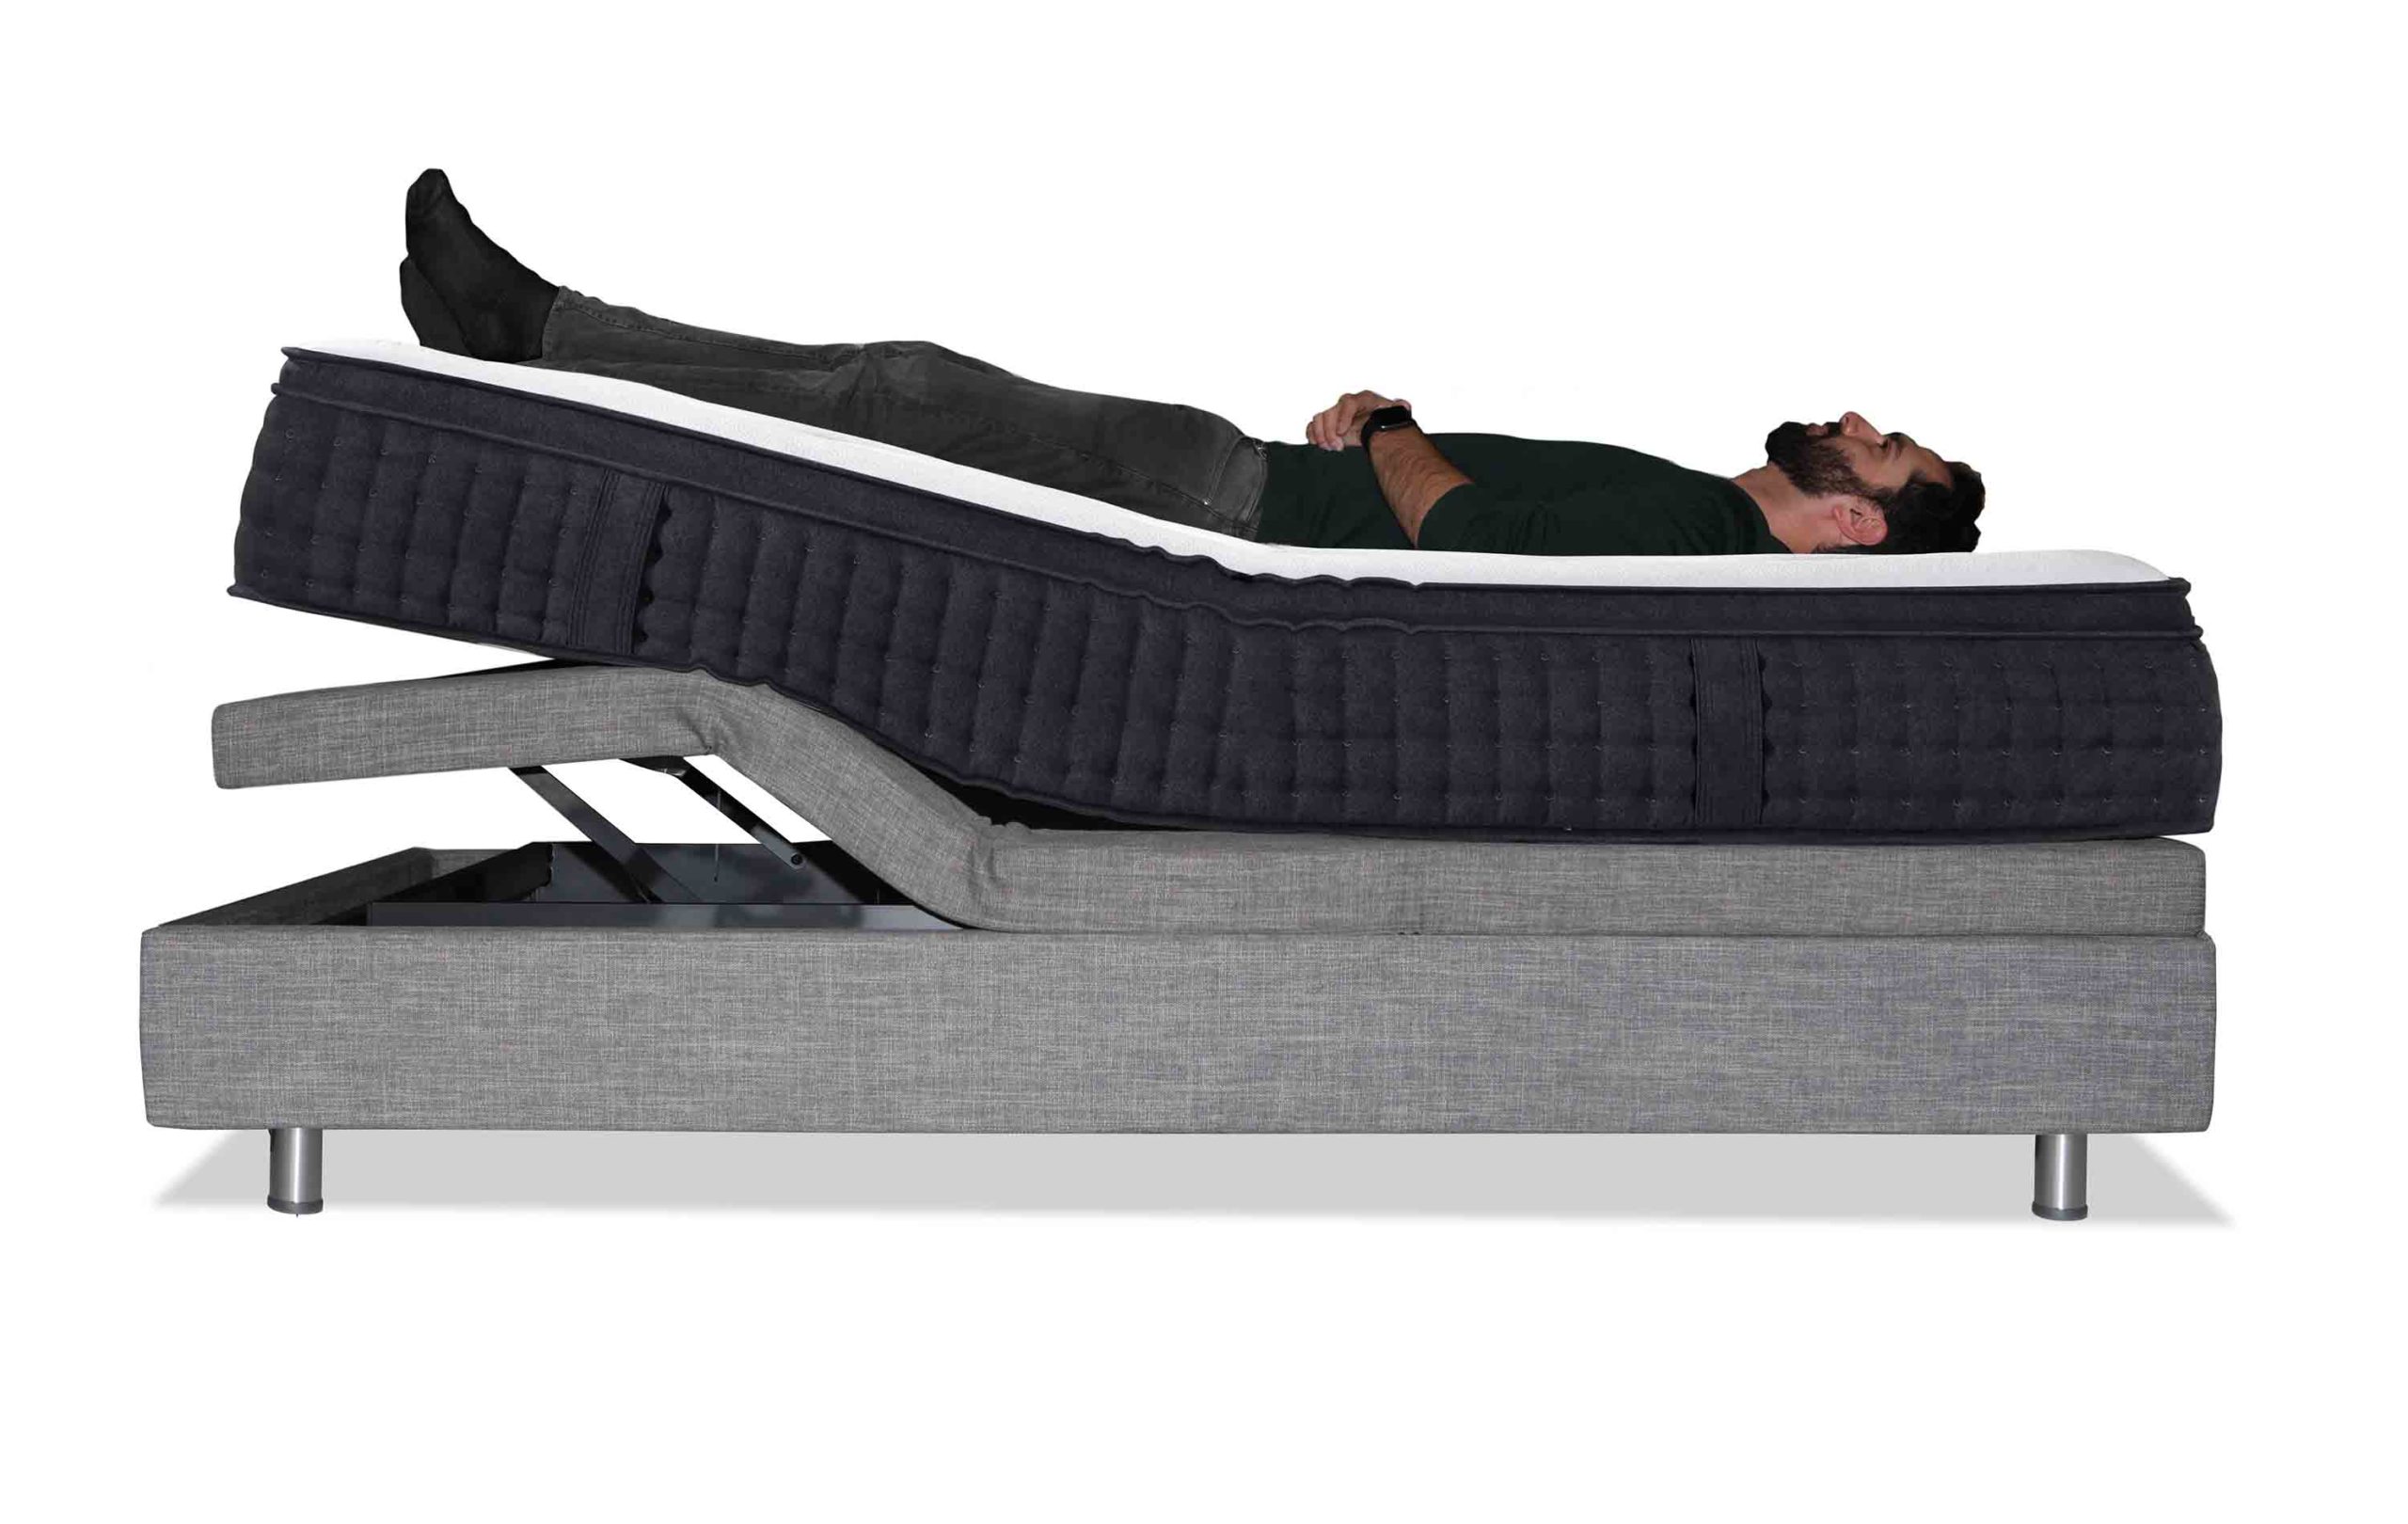 chiropedic-adjustable-bed-electric-bed-feet-up-with-mark-scaled-1